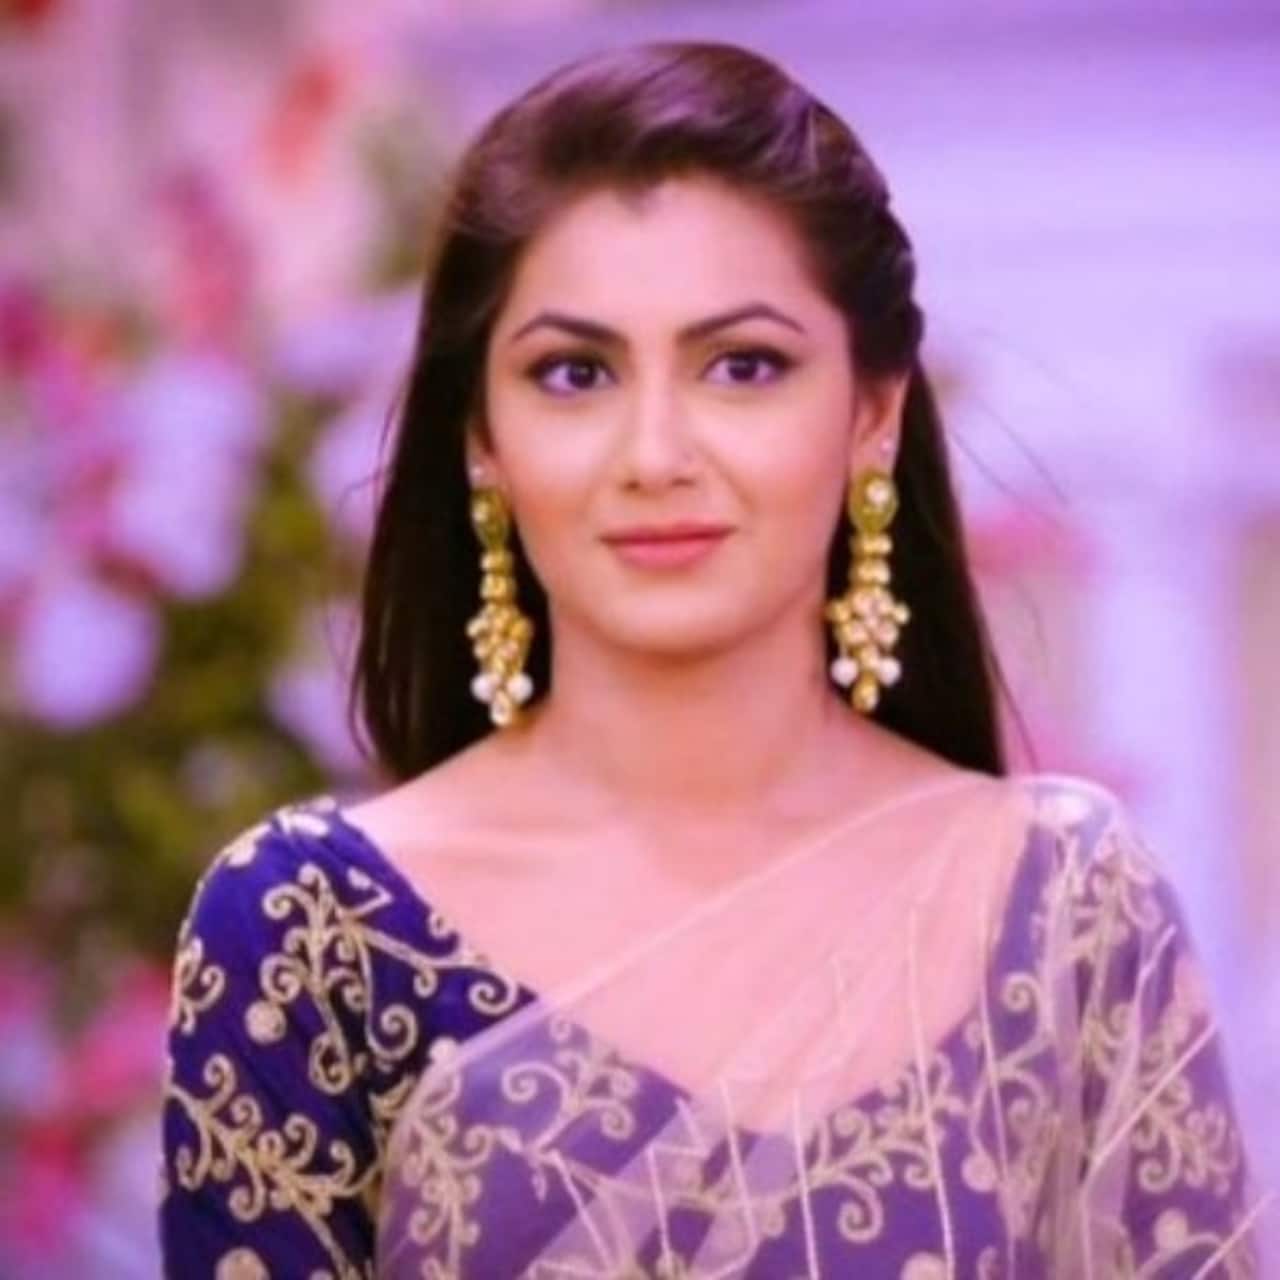 Kumkum Bhagya Actress Sriti Jha Aka Pragya Has A Special Message For Fans As The Show Completes